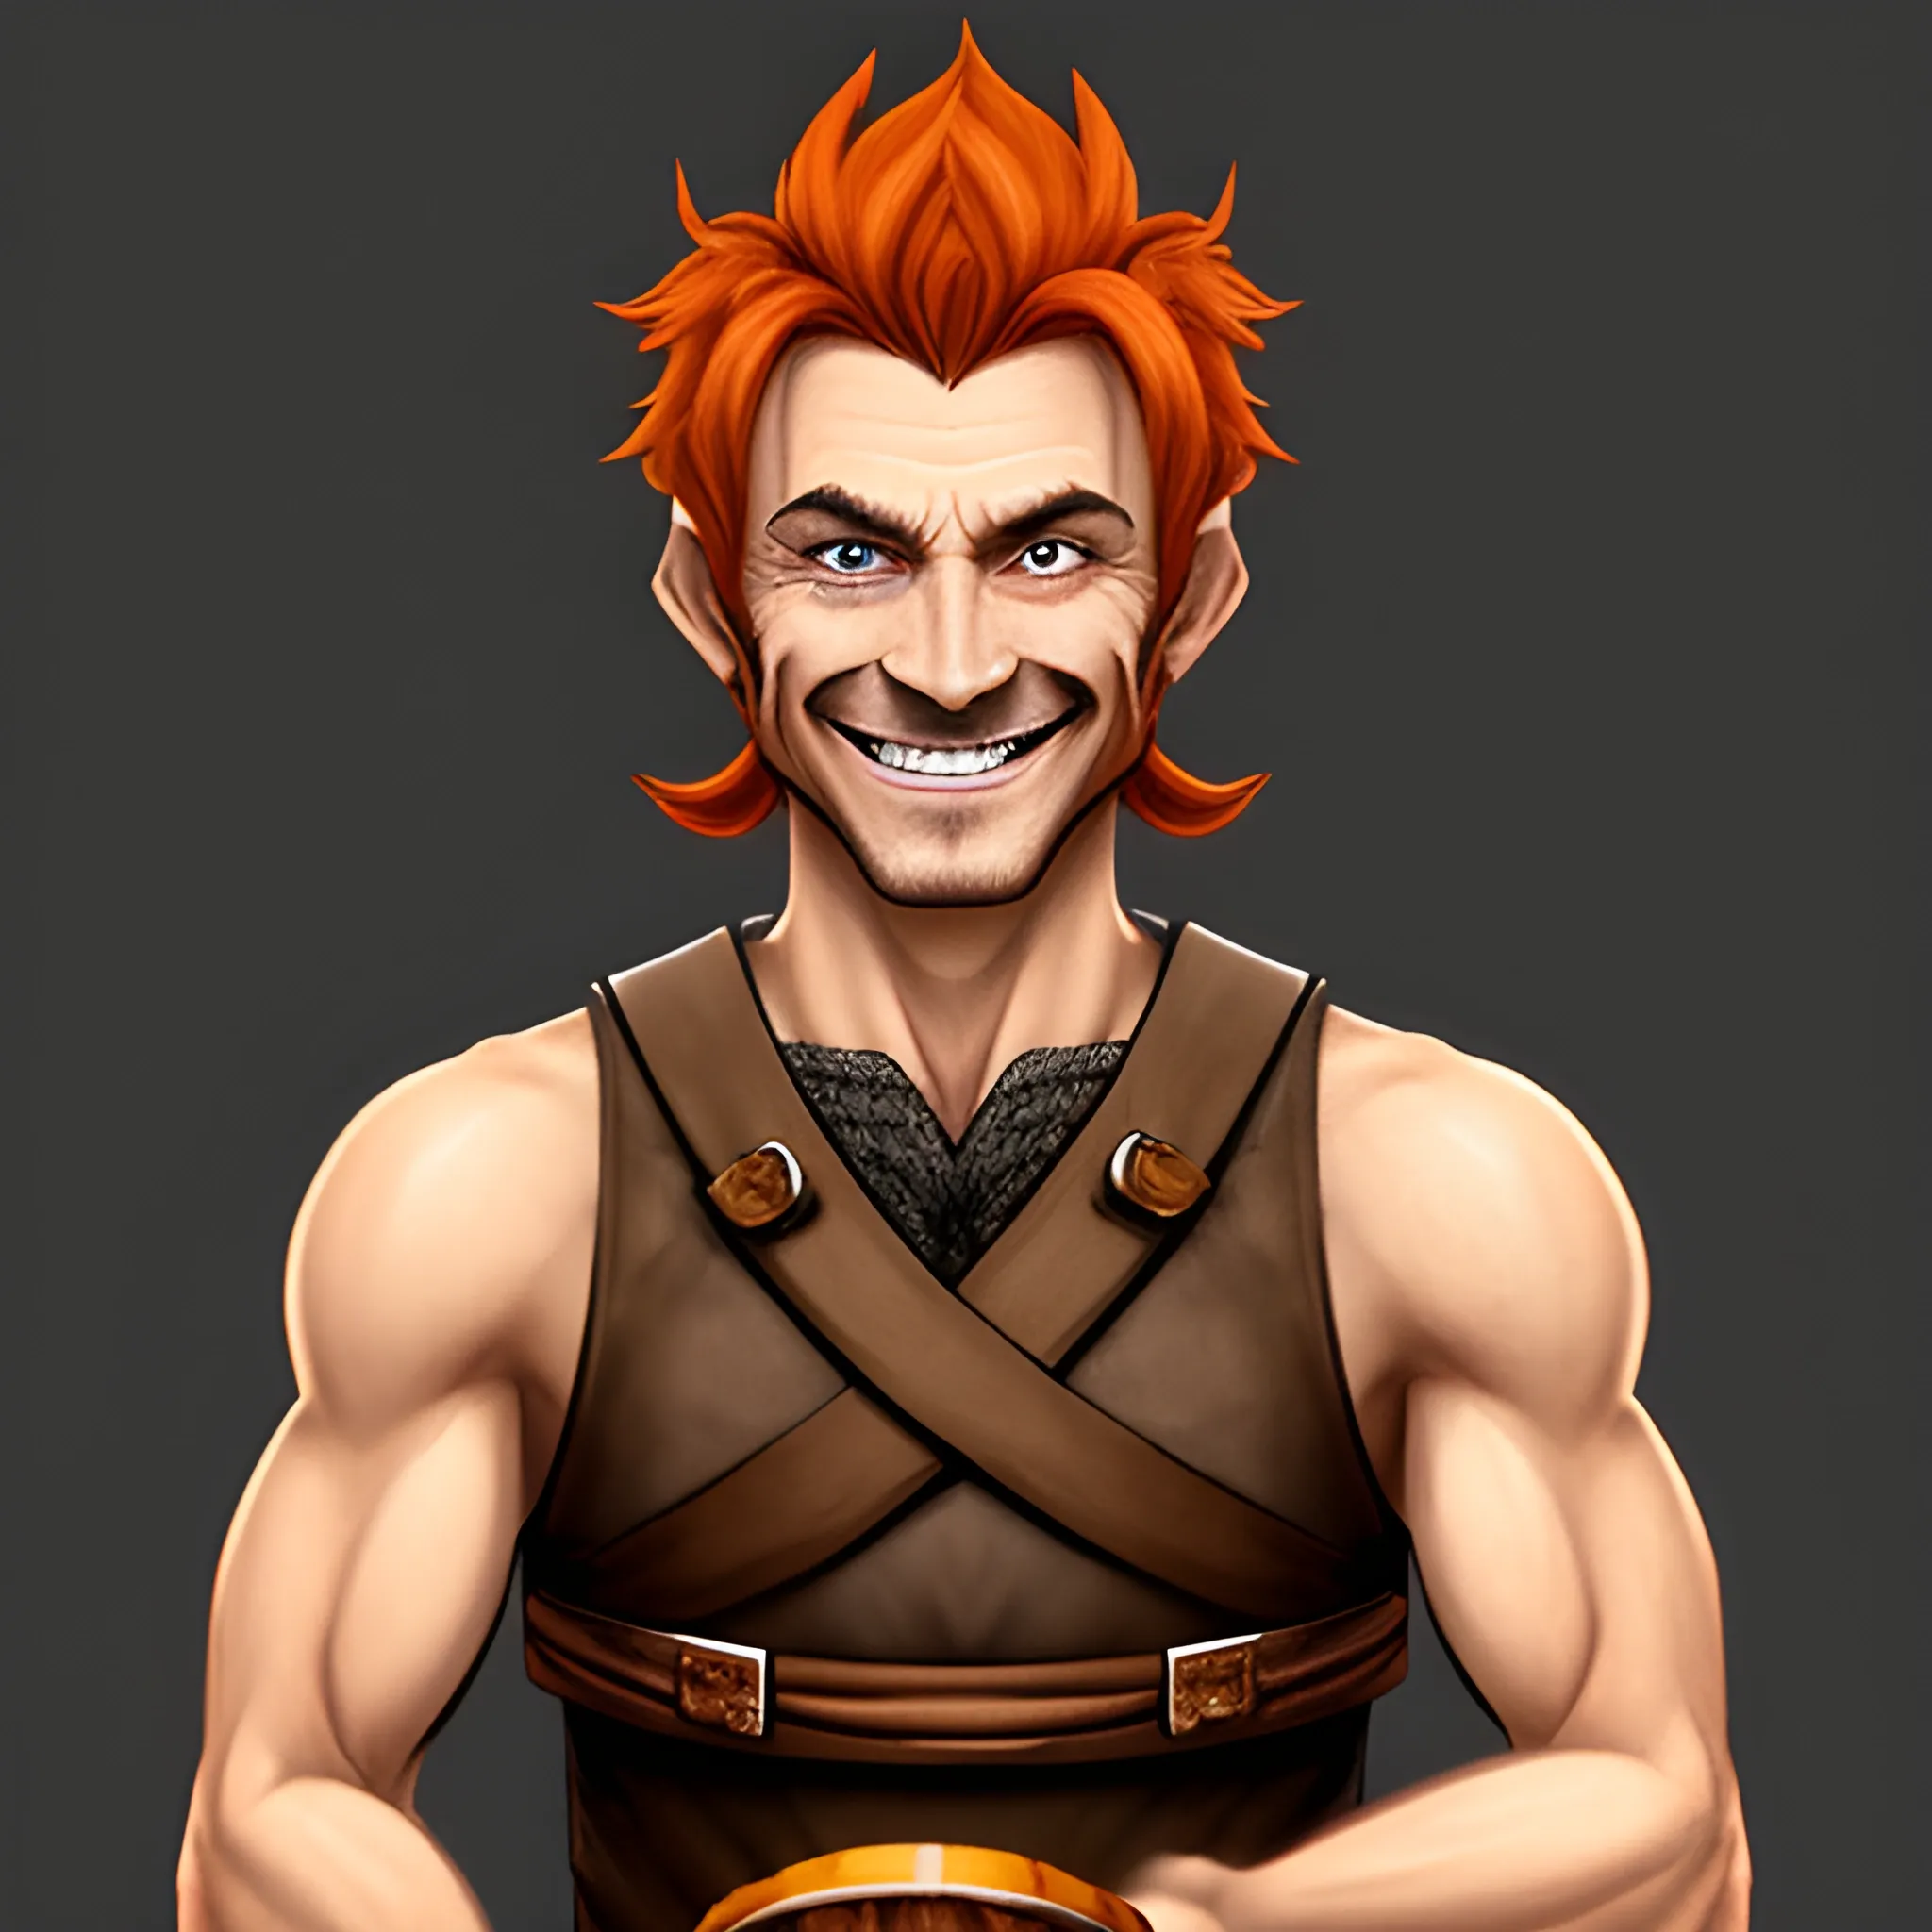 DnD fantasy frail skinny kid looking face tennage halfling male short haired dark orange ginger smiling with a mugshot expression and playing a drum